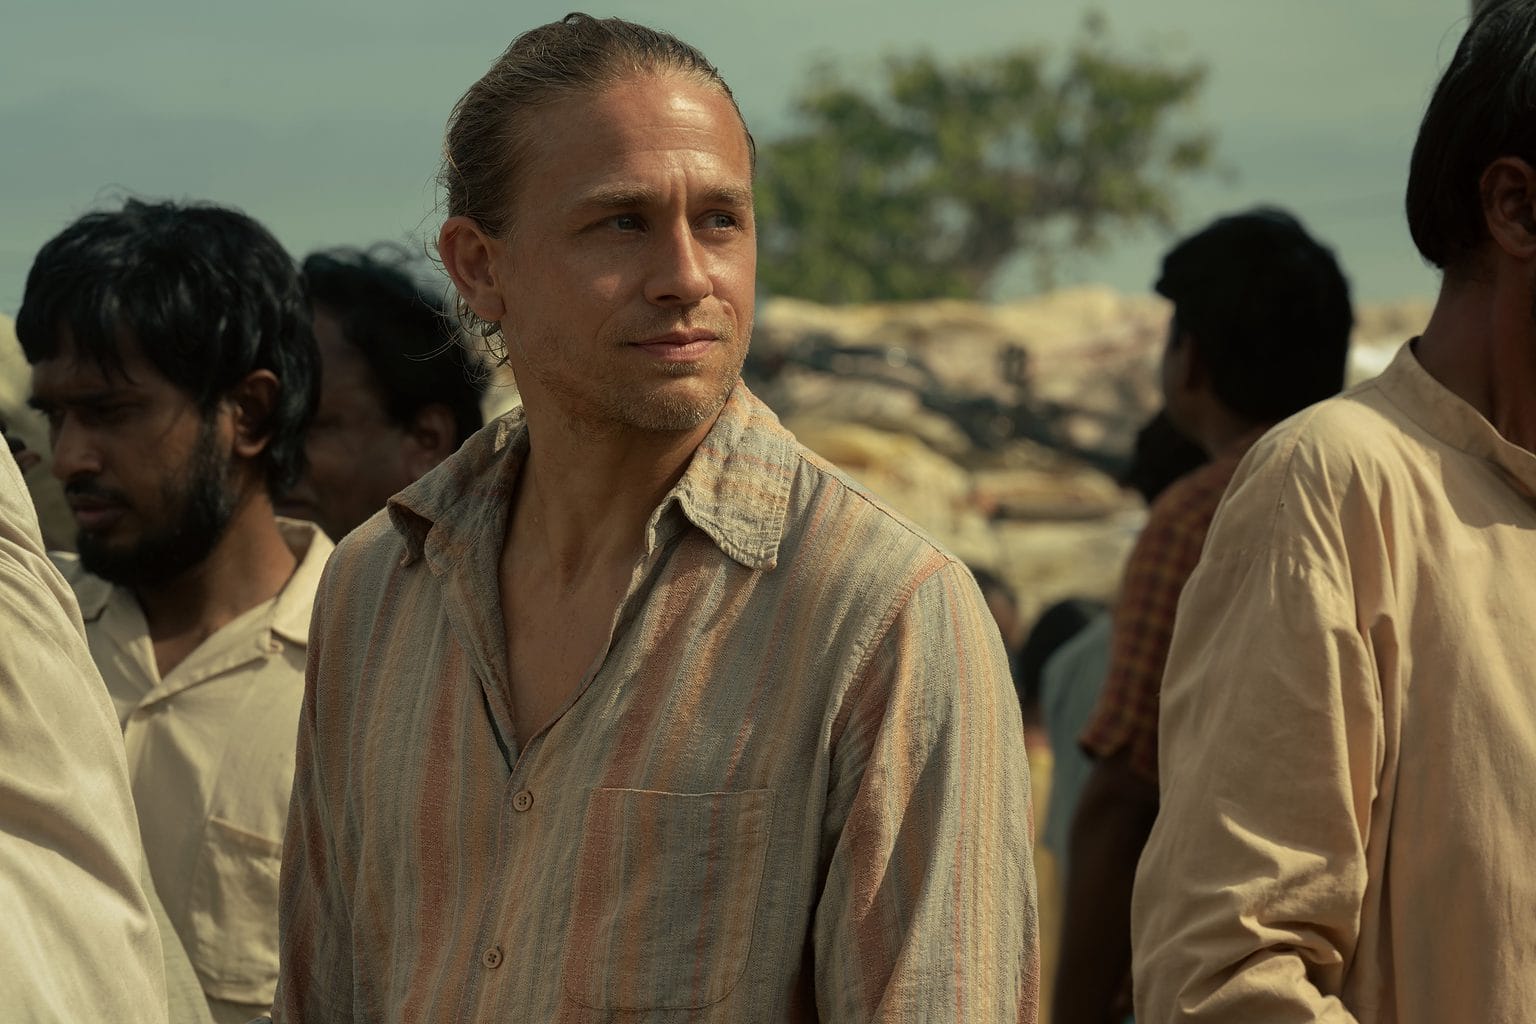 Shantaram recap Apple TV+: During an outbreak of disease, Lin Ford (played by Charlie Hunnam) makes a sketchy deal.